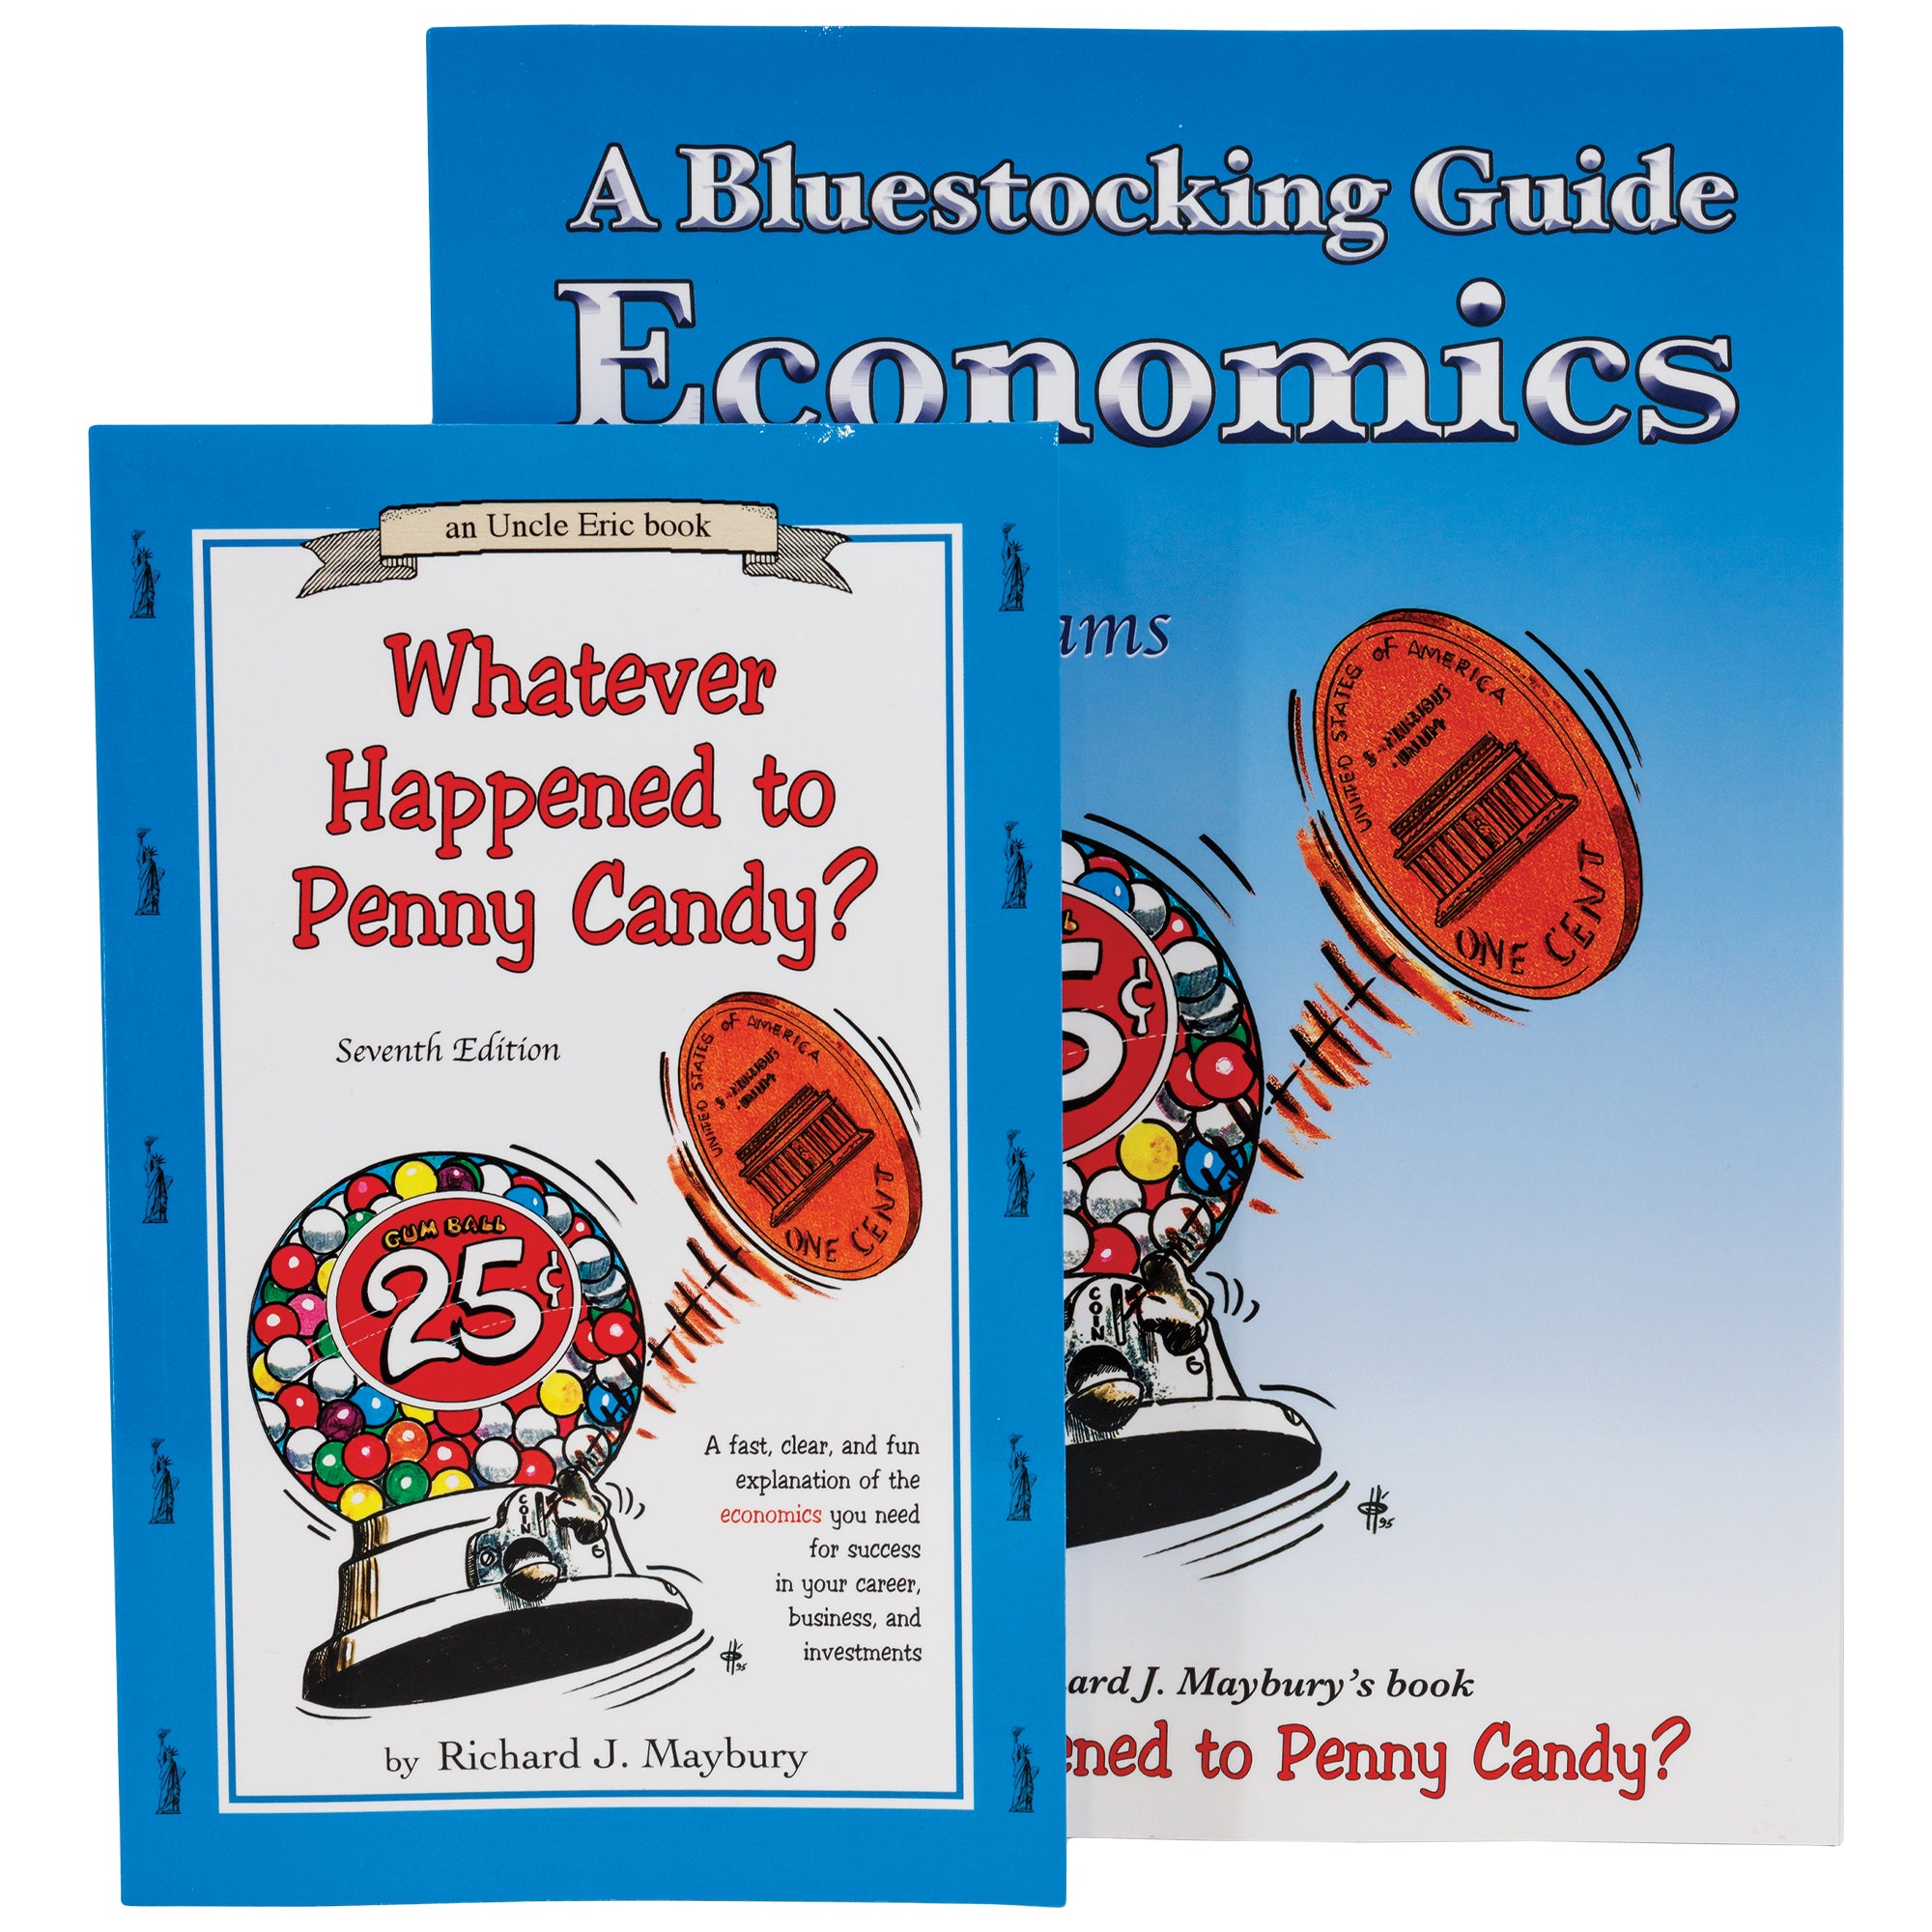 Set of 2 Bluestocking Economics Books. The larger blue book in the background shows a gumball machine with a large penny. The smaller book covers over the larger book and also shows a gumball machine with a large penny on a white background.